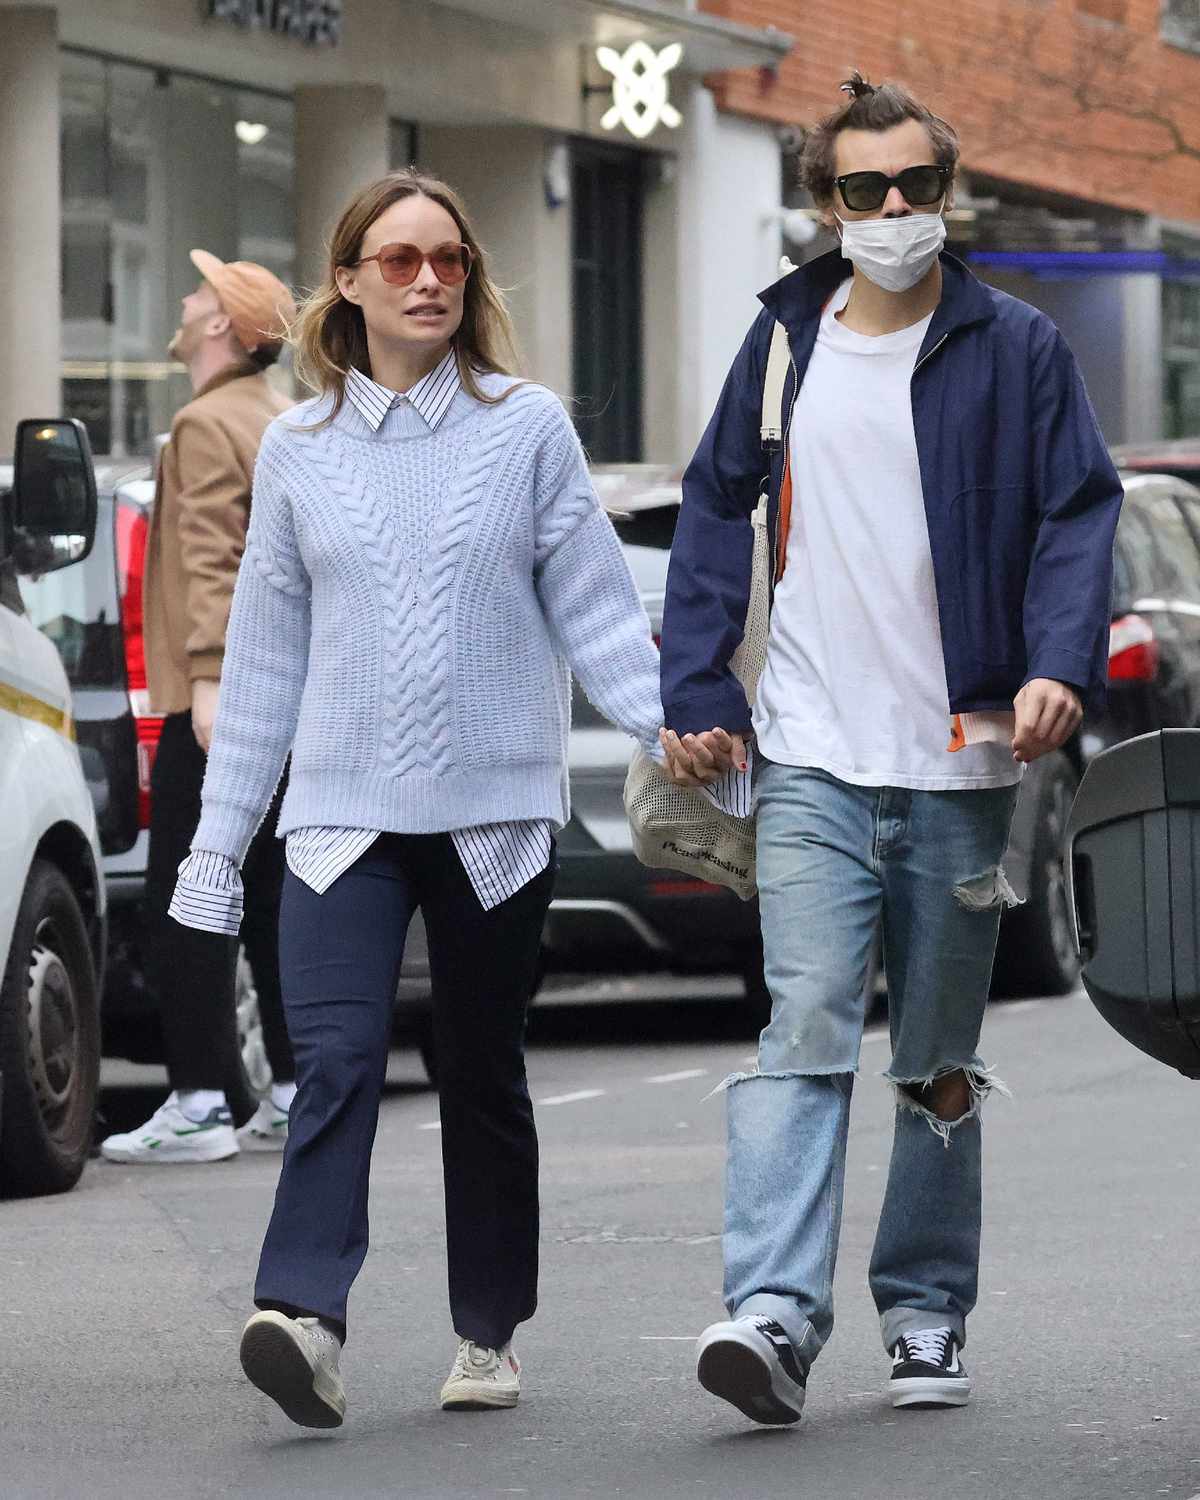 Harry Styles and Olivia Wilde London March 2022